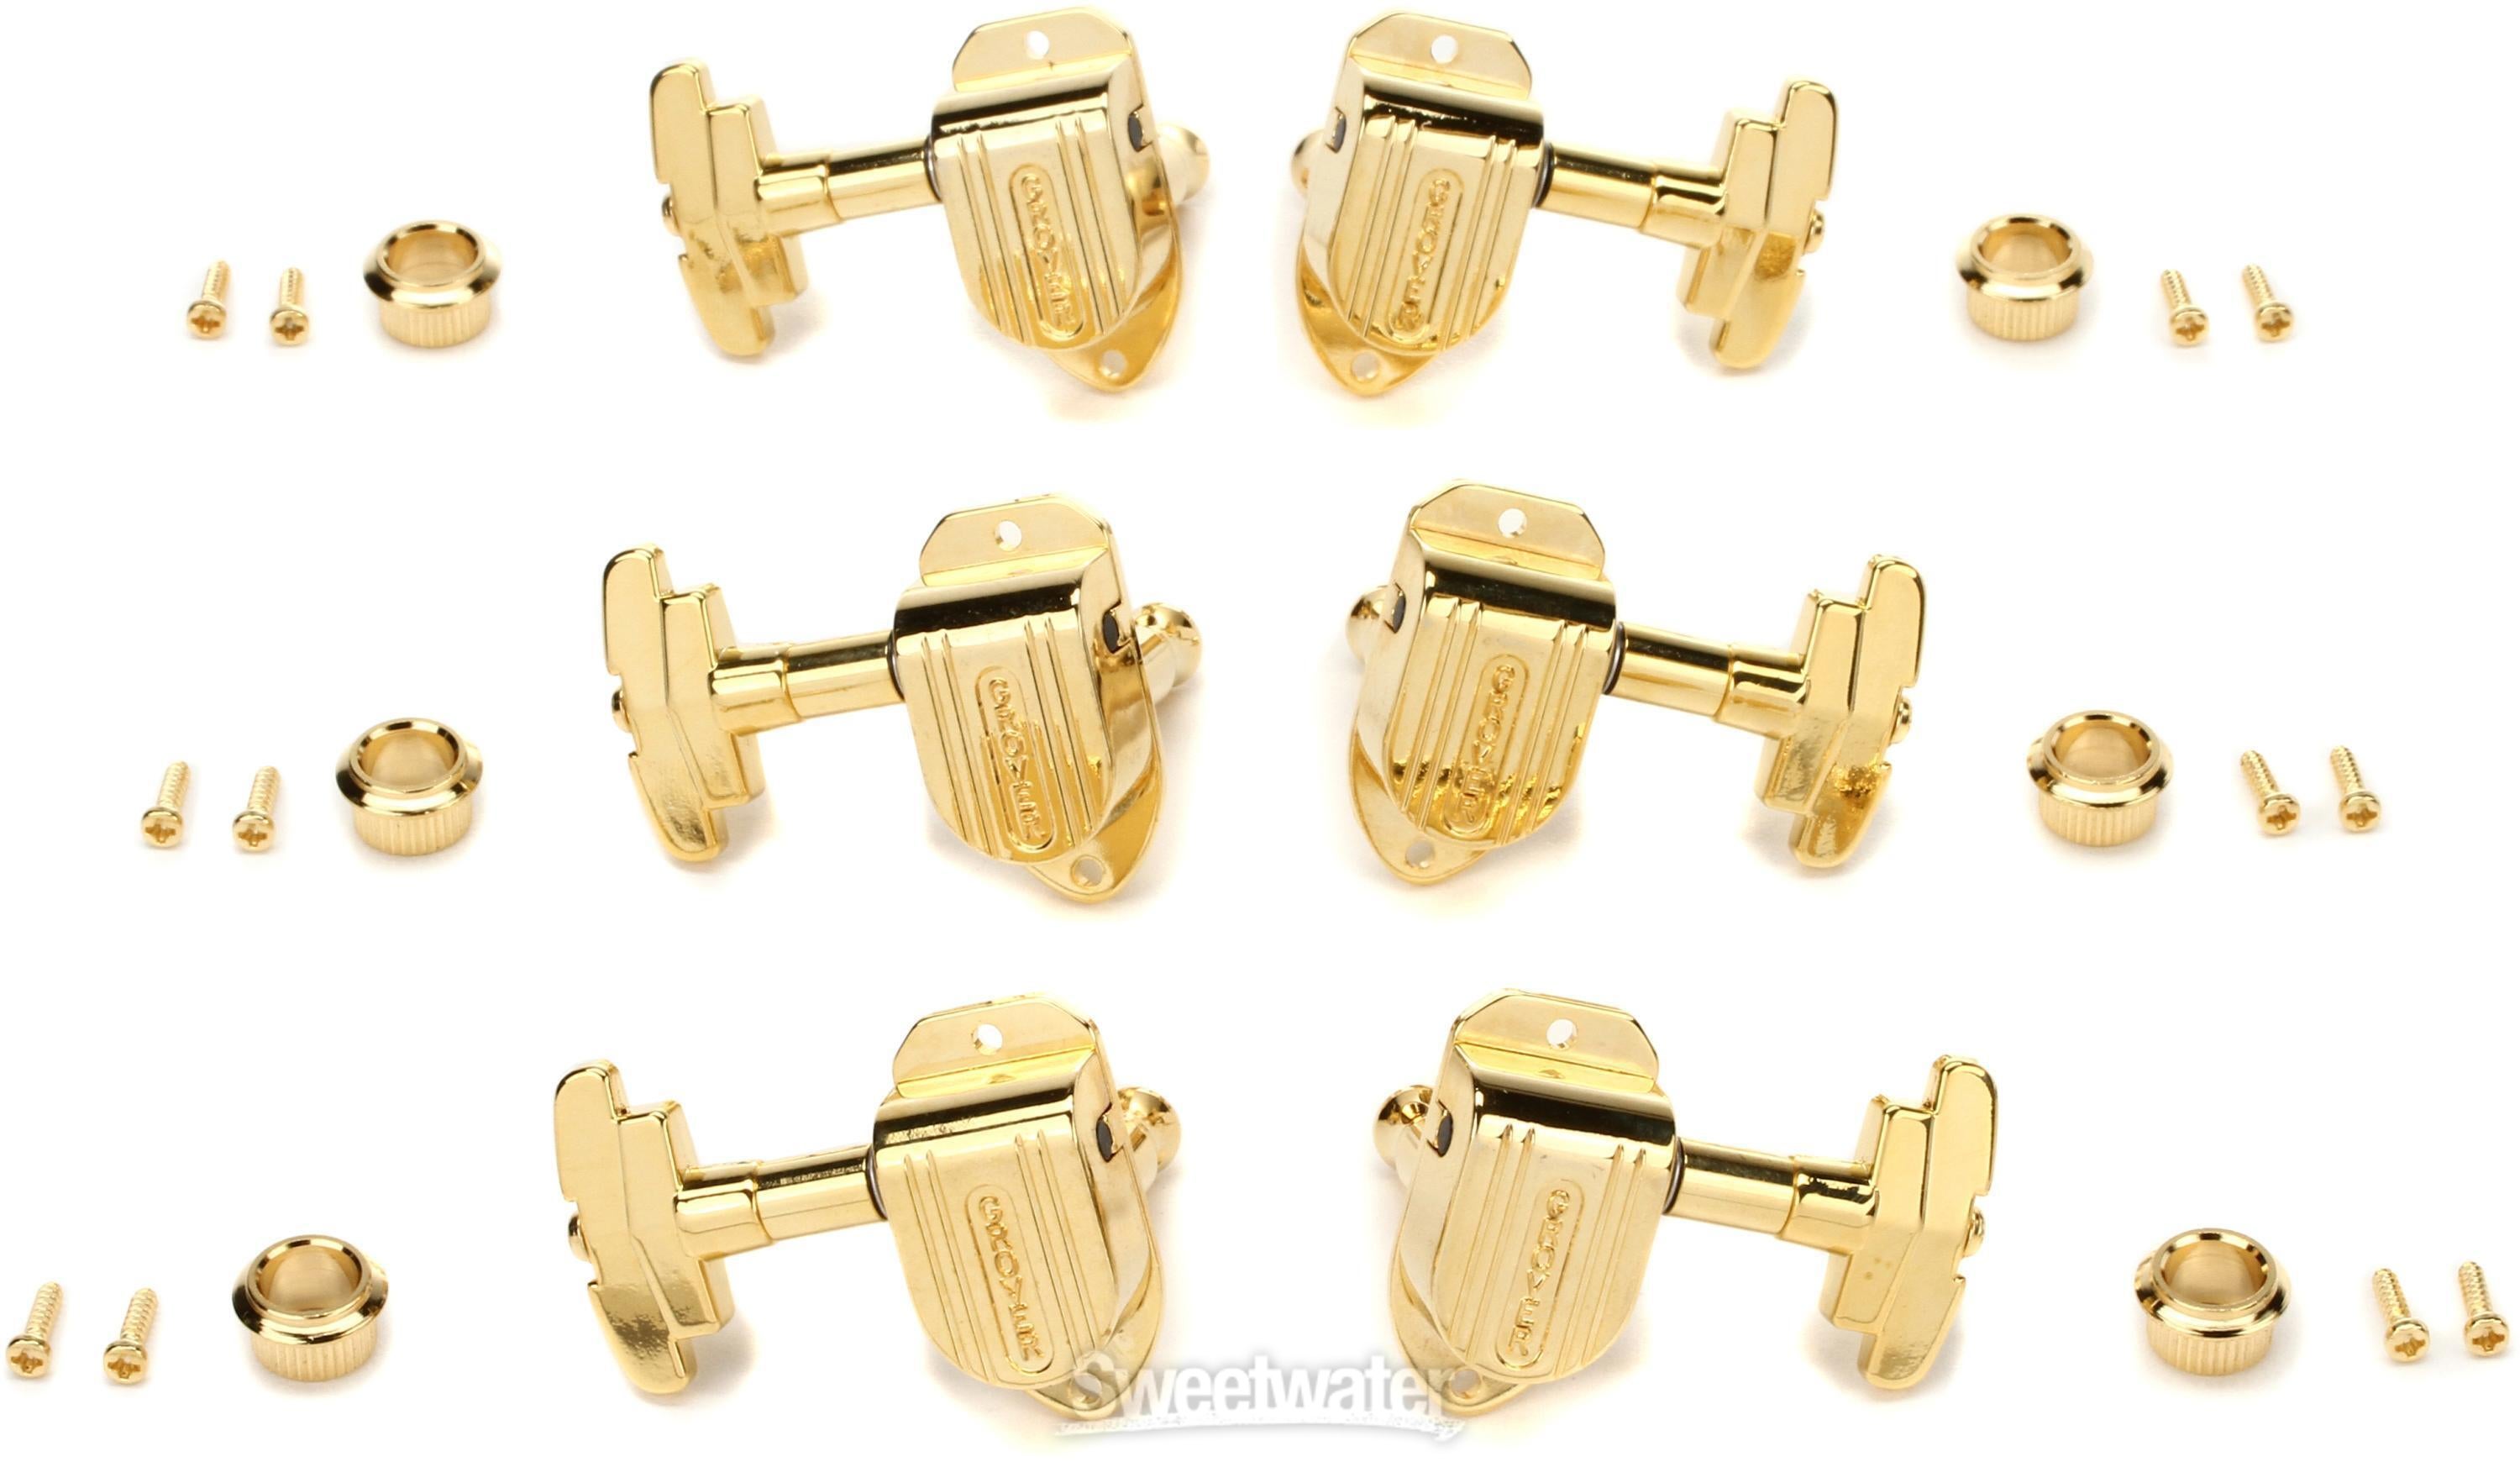 Grover 150G Imperial Tuners - 3+3 - Gold